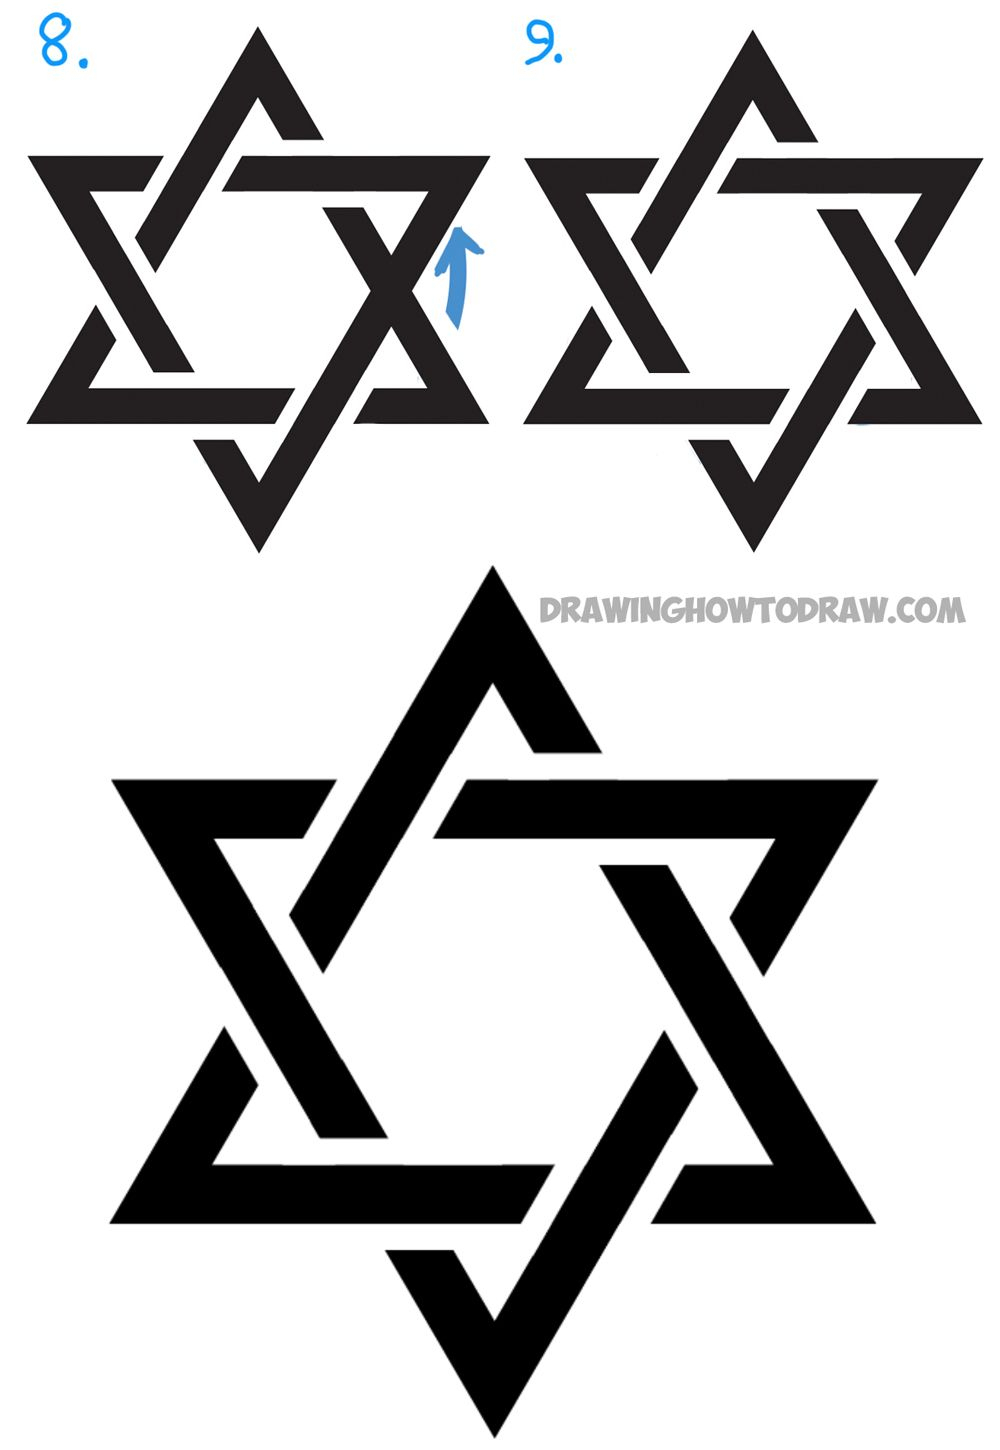 How To Draw The Star Of David (The Jewish Star) With Easy Steps - Star Of David Template Free Printable